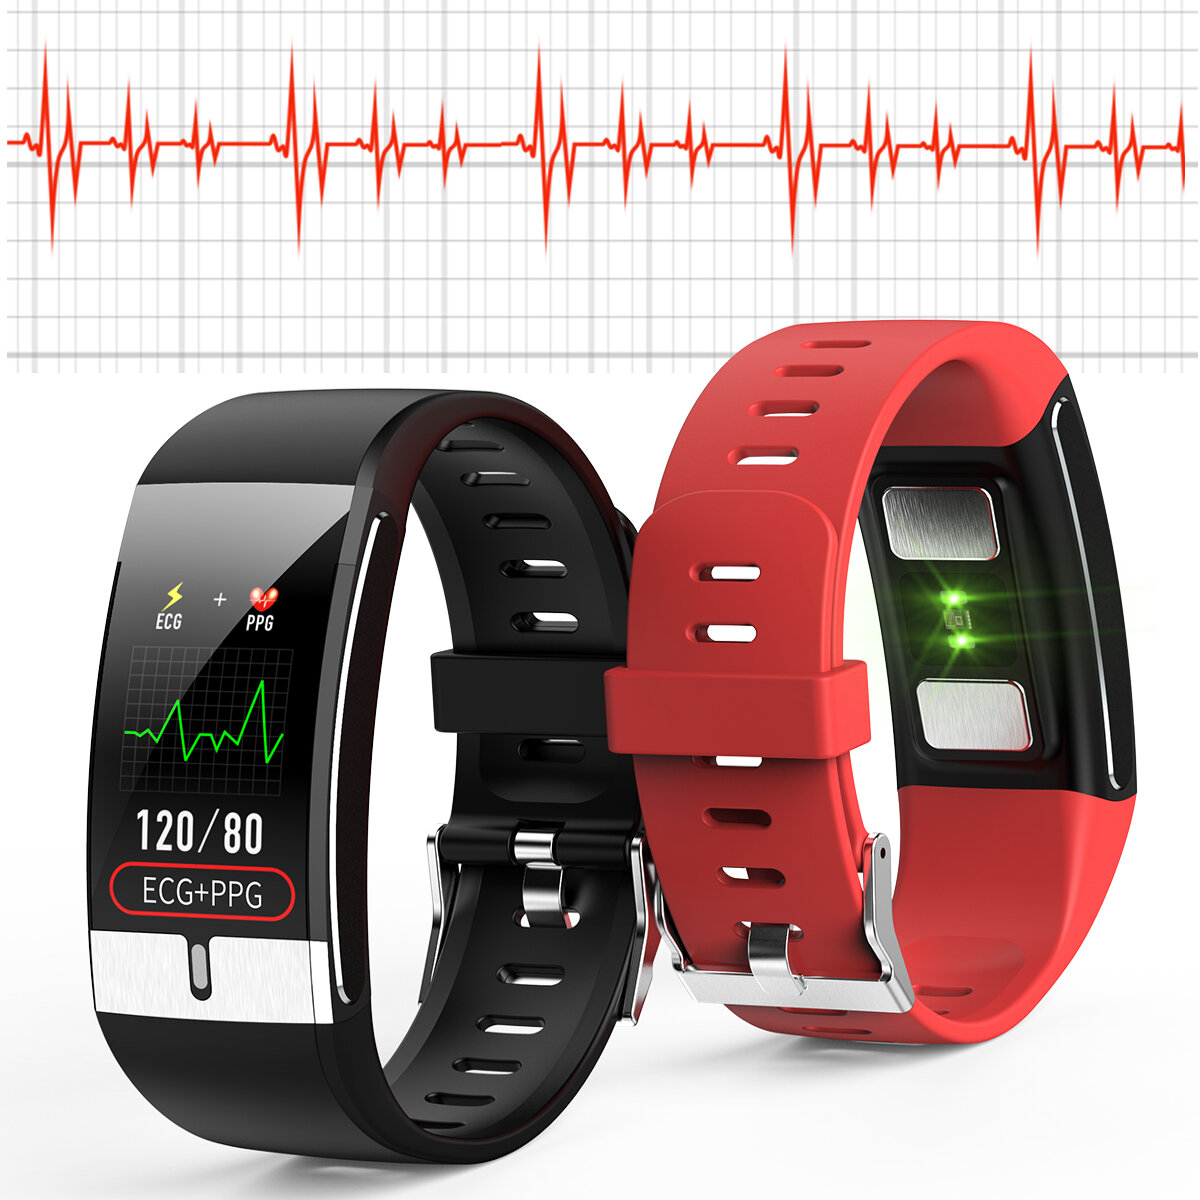 [SPO2 Monitor]Bakeey E66 Thermometer ECG+PPG Heart Rate Blood Pressure Oxygen Monitor IP68 Waterproof USB Charging Smart